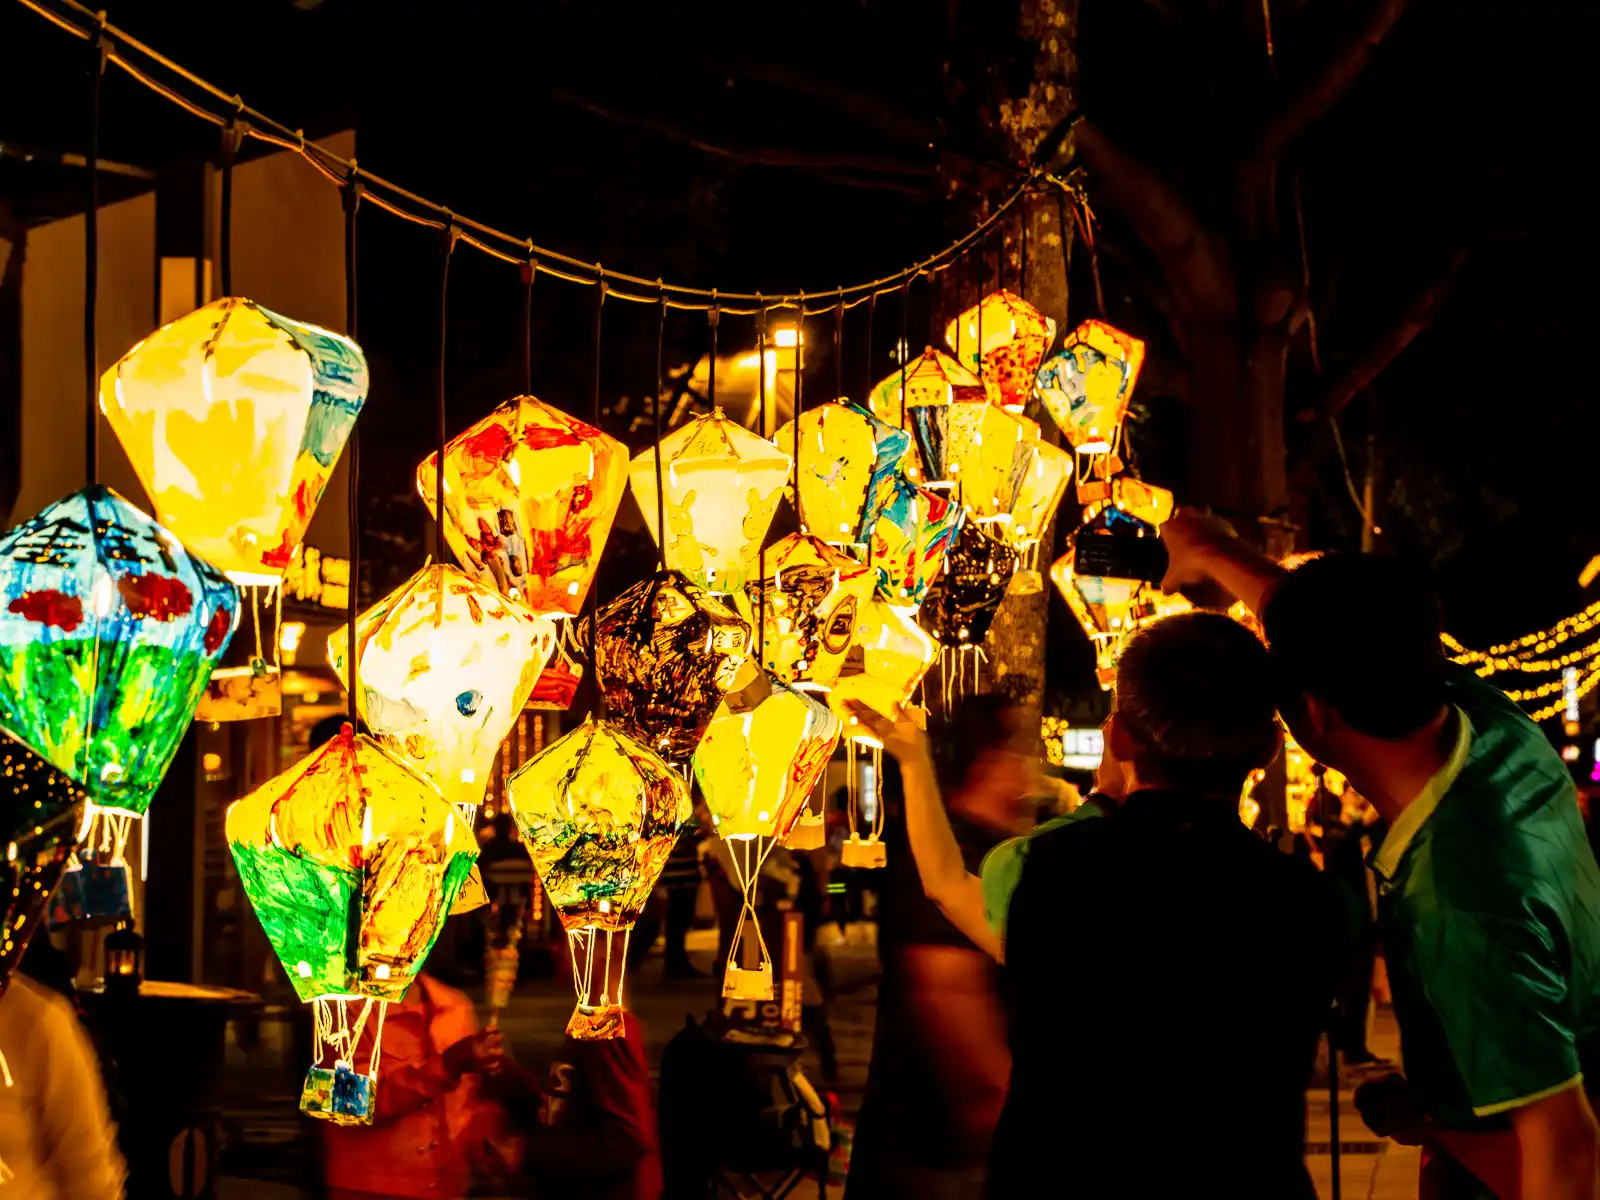 Miniature hanging painted lanterns decorate one corner of the park.